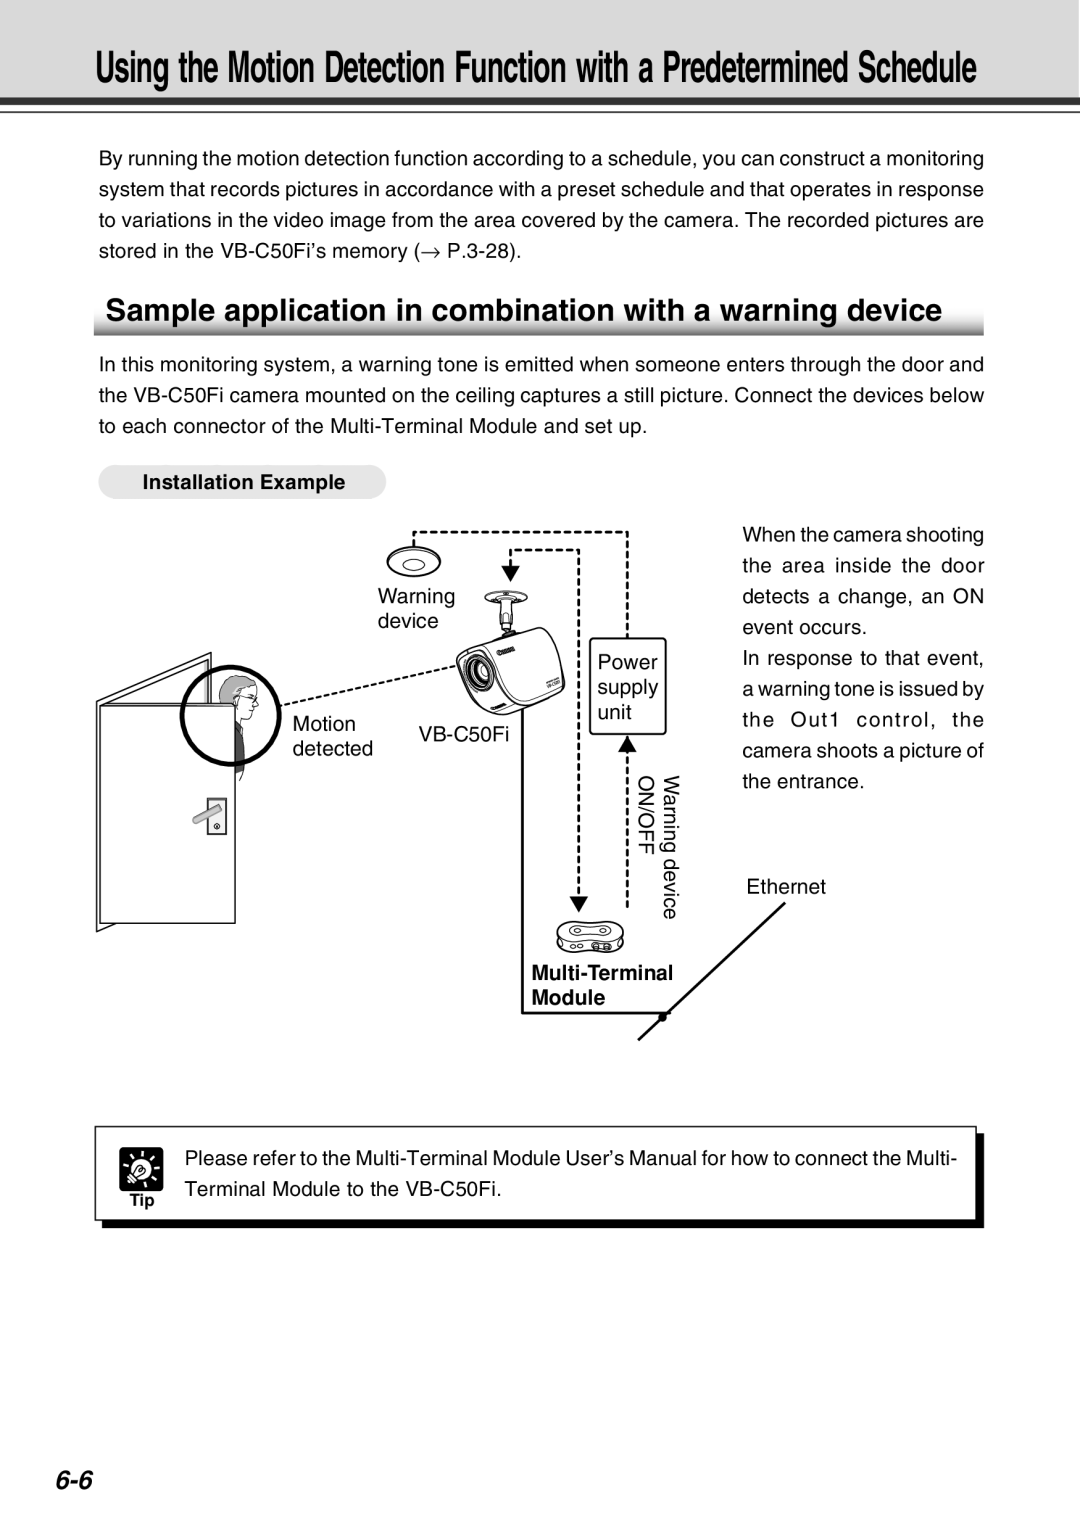 Canon Vb-C50fi user manual Installation Example, Warning device Motion VB-C50Fidetected 